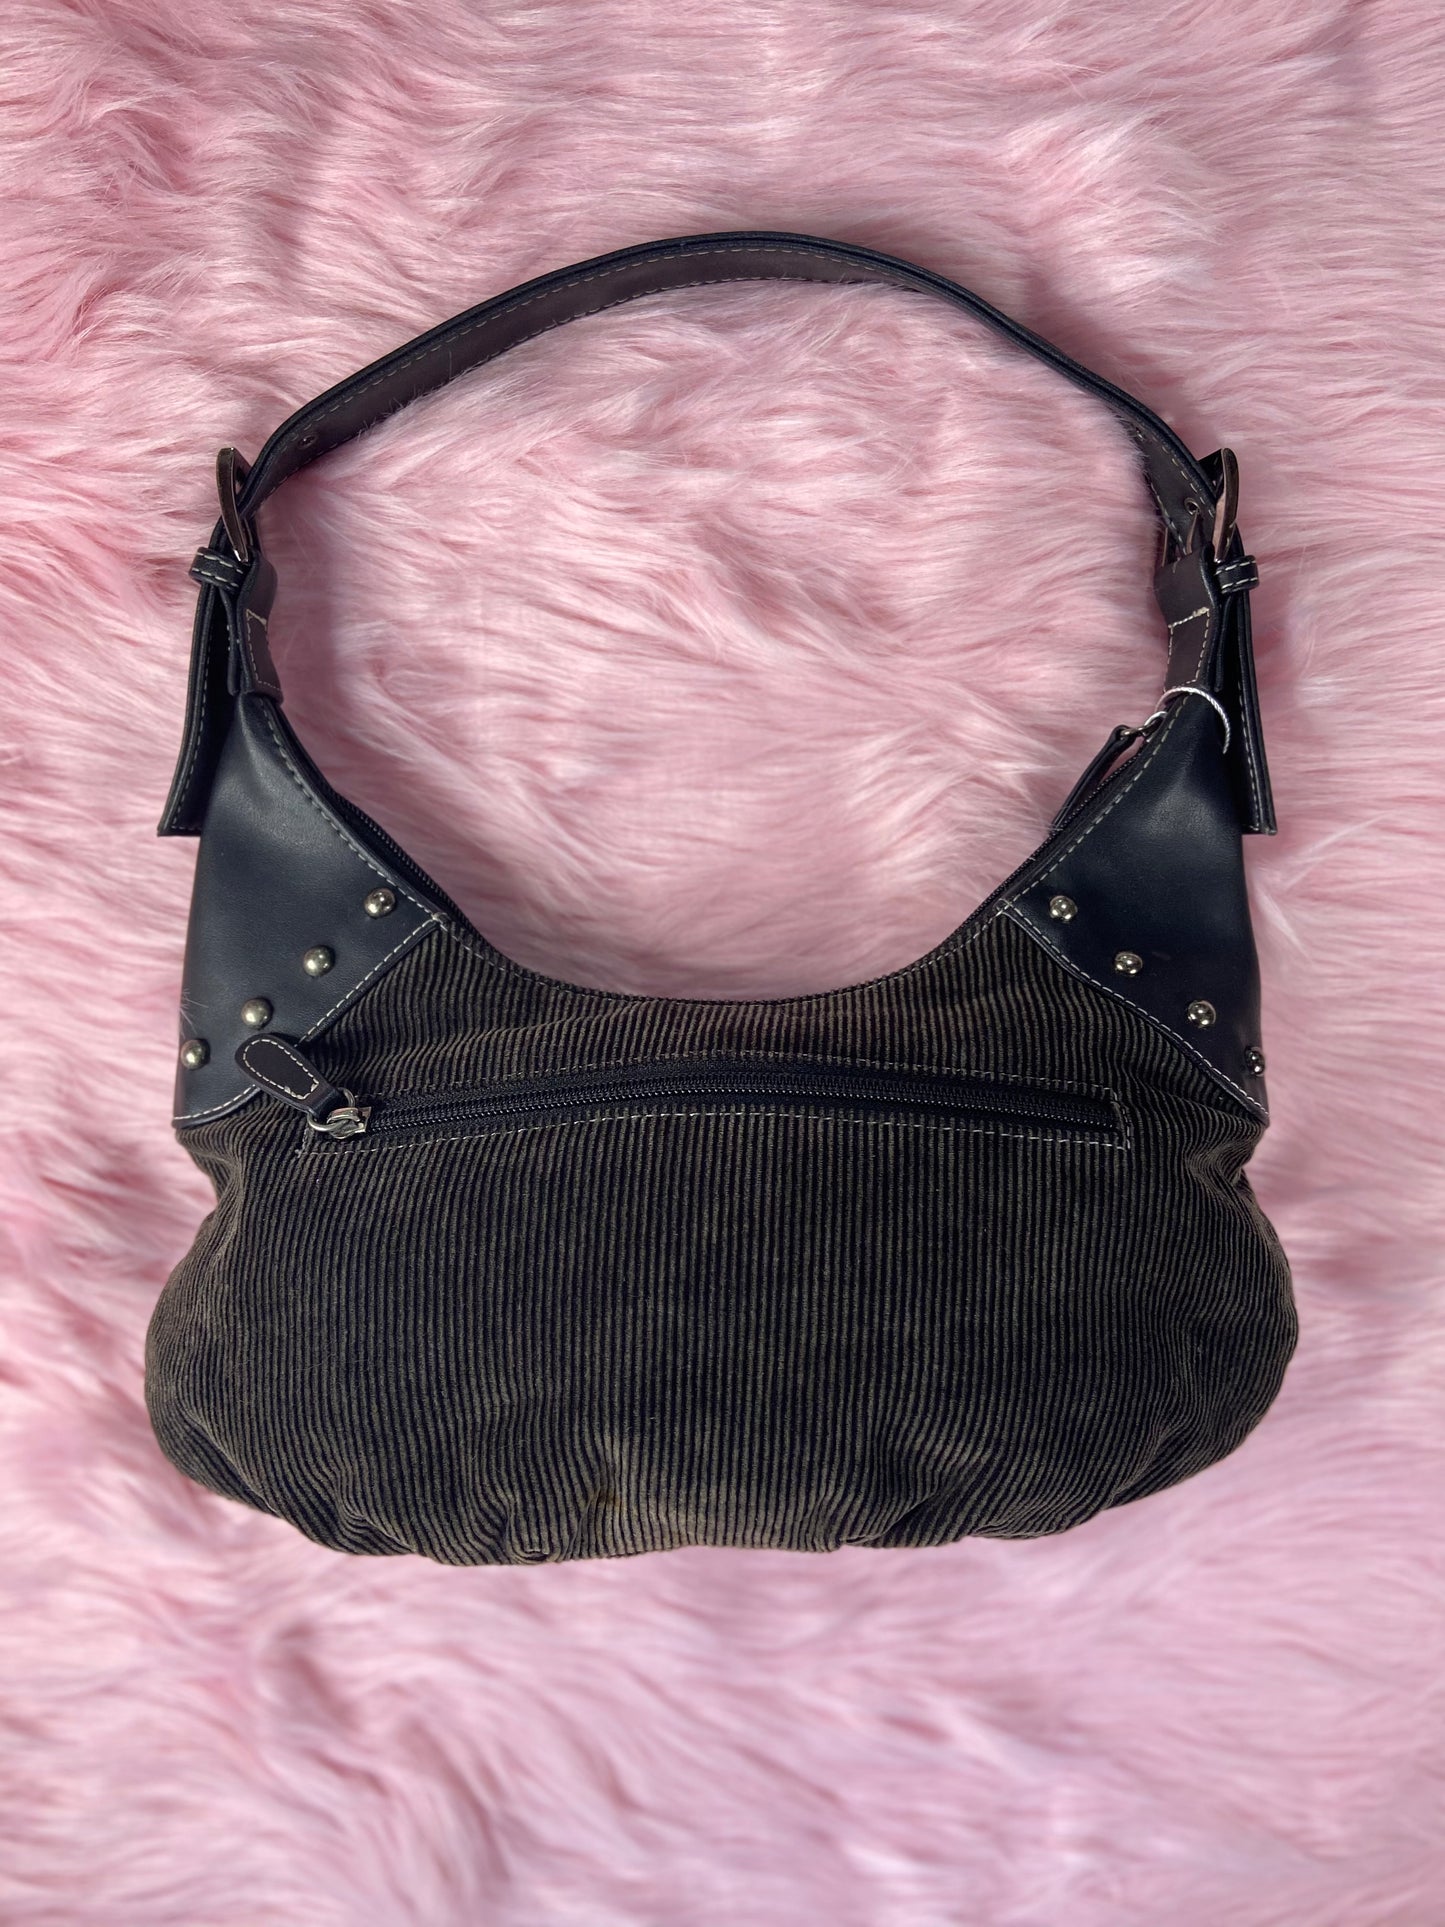 Black Leather and Corduroy Purse